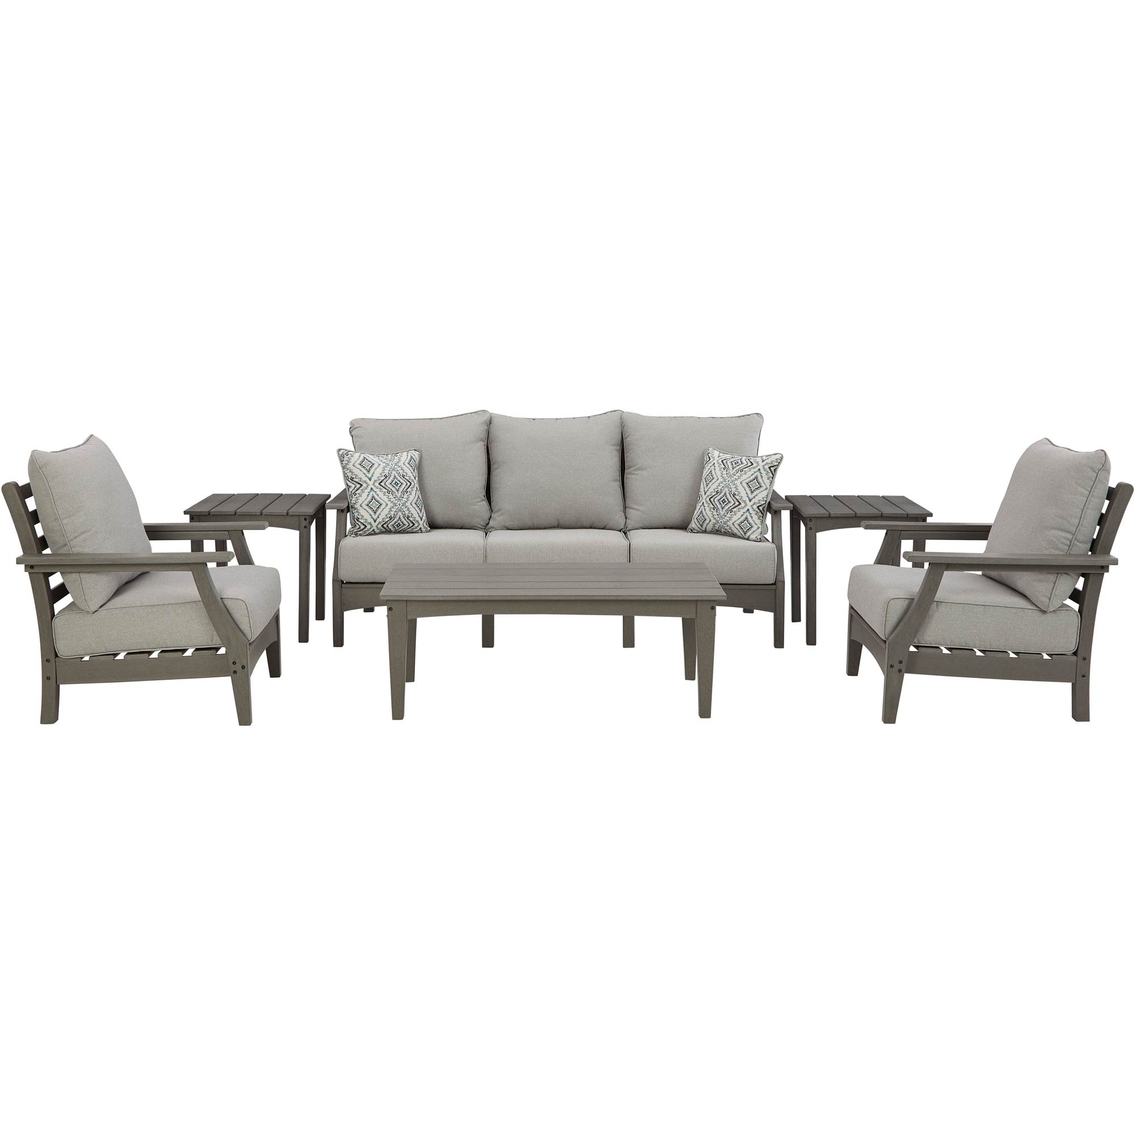 Signature Design by Ashley Visola 6 pc. Outdoor Seating Set with Sofa